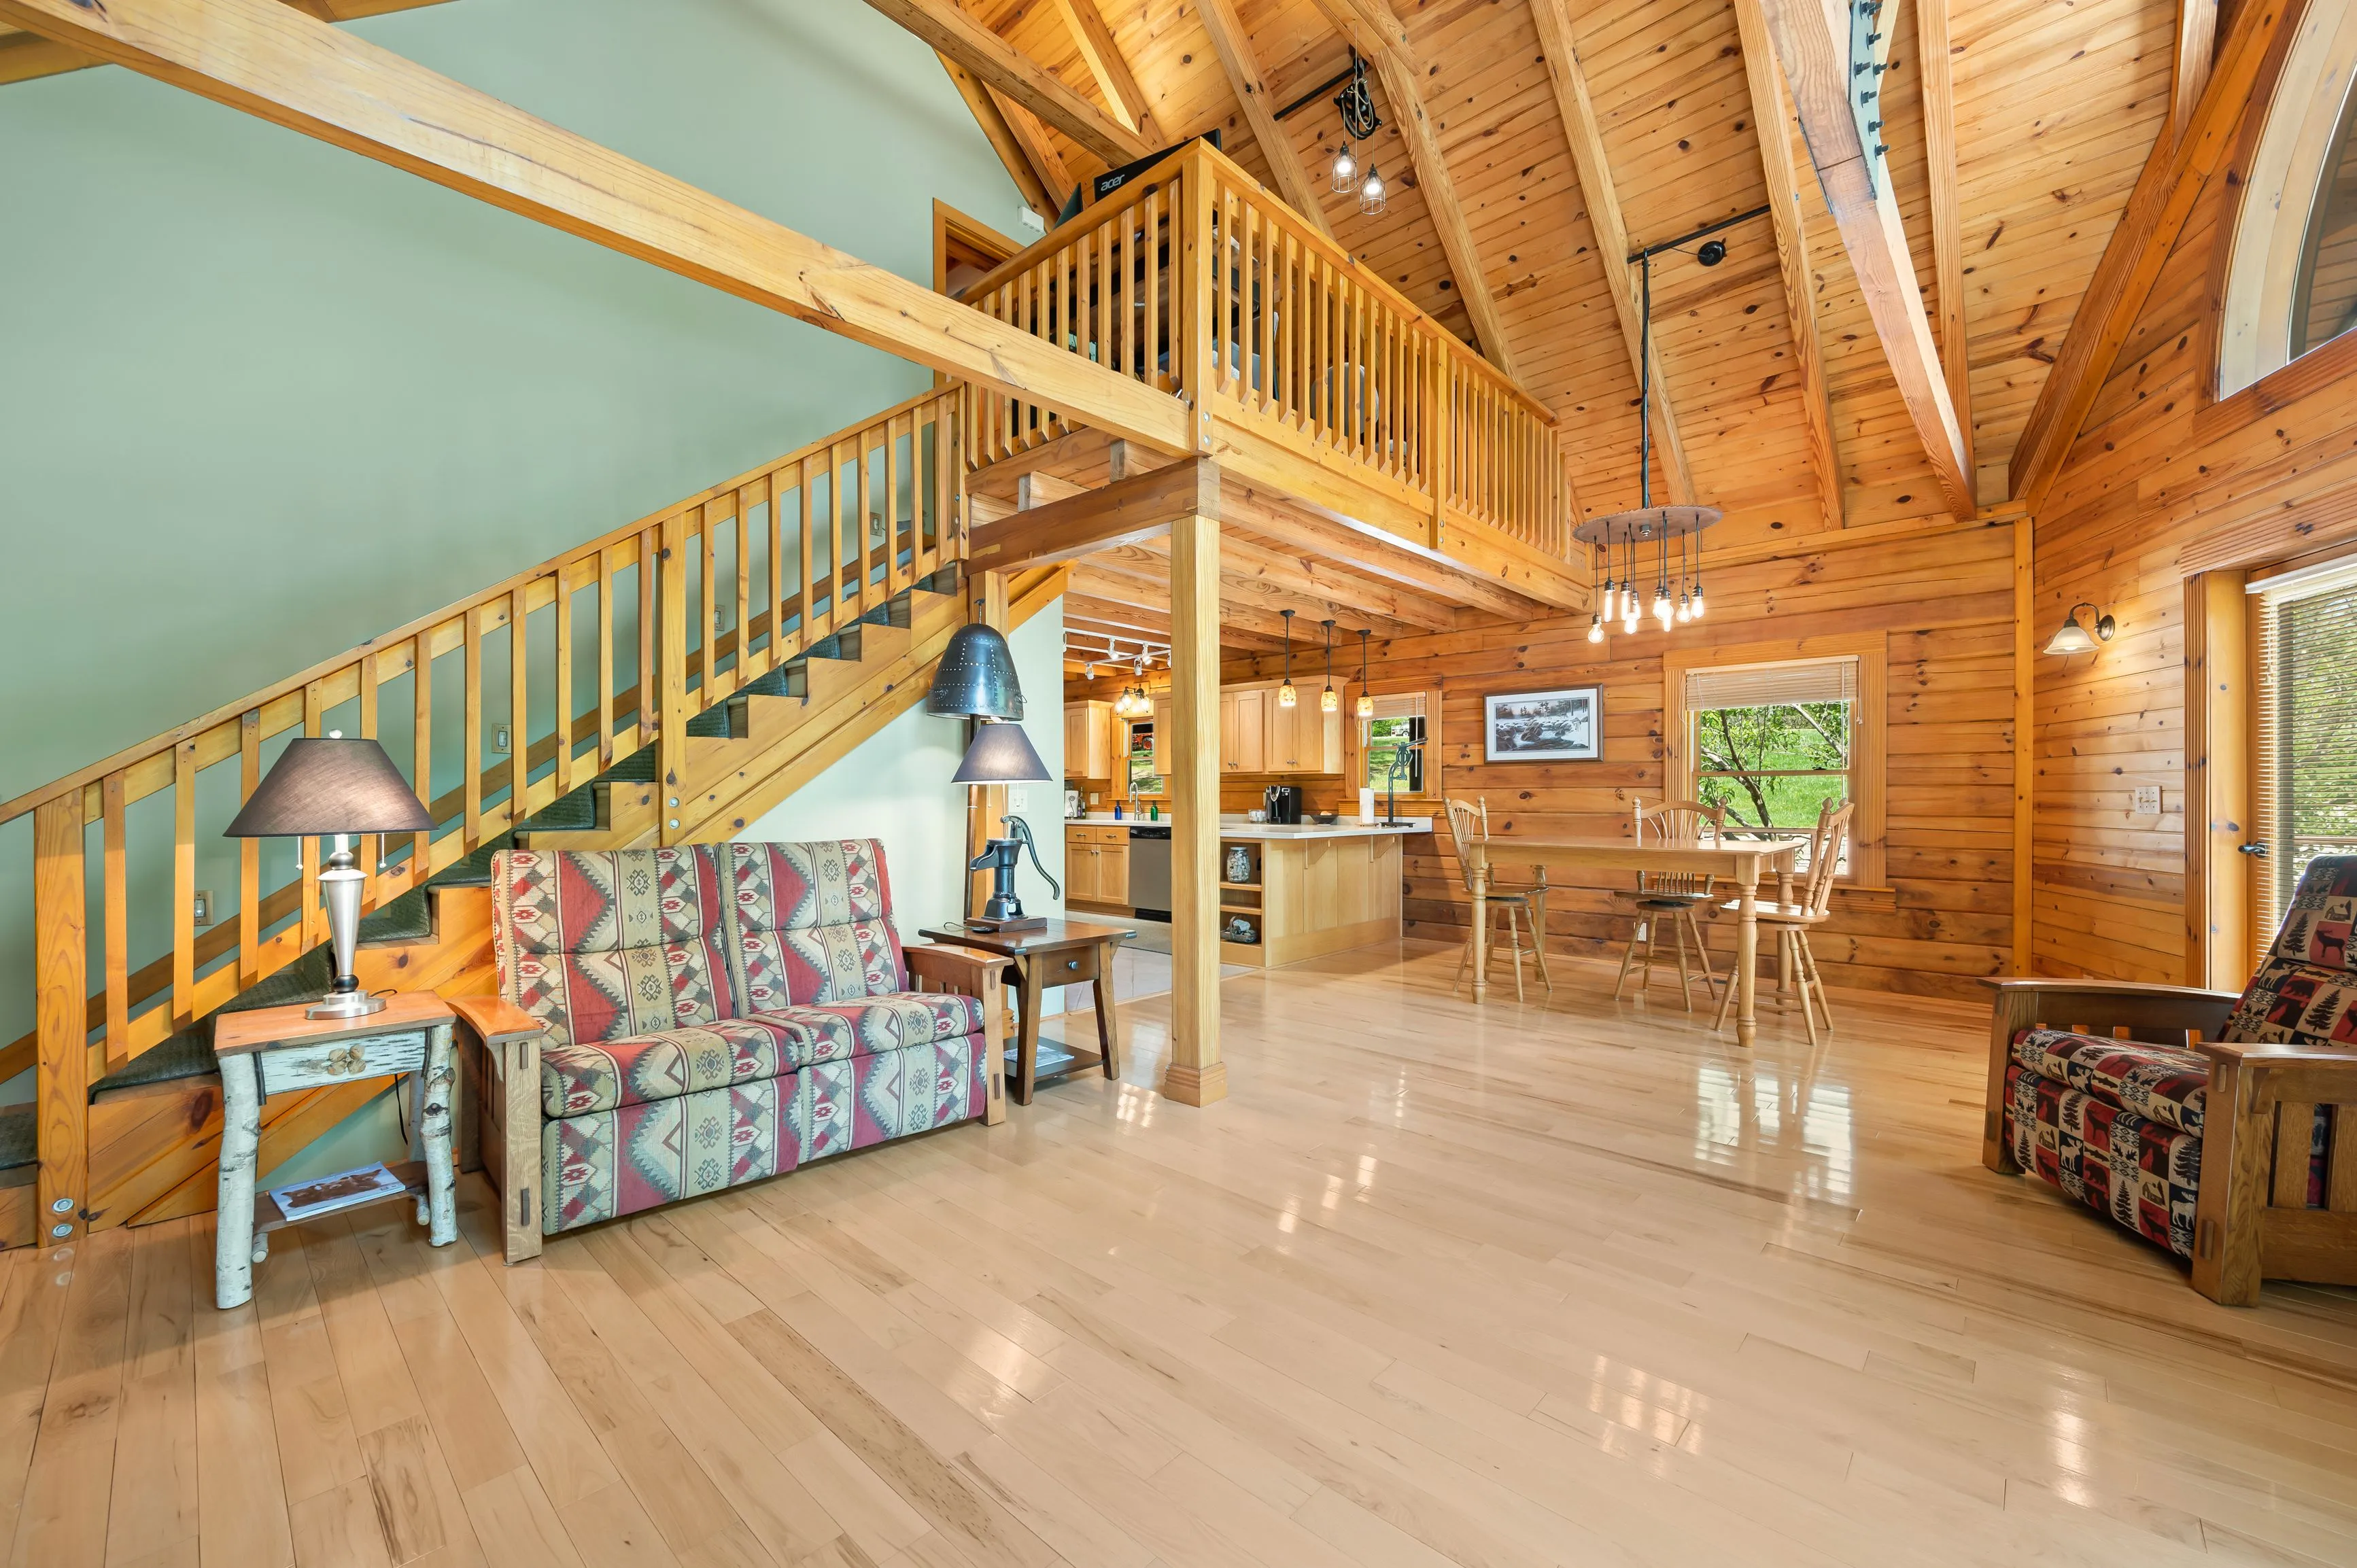 Interior of a spacious log cabin with a high ceiling, wooden stairs leading to a second level, and rustic furniture.